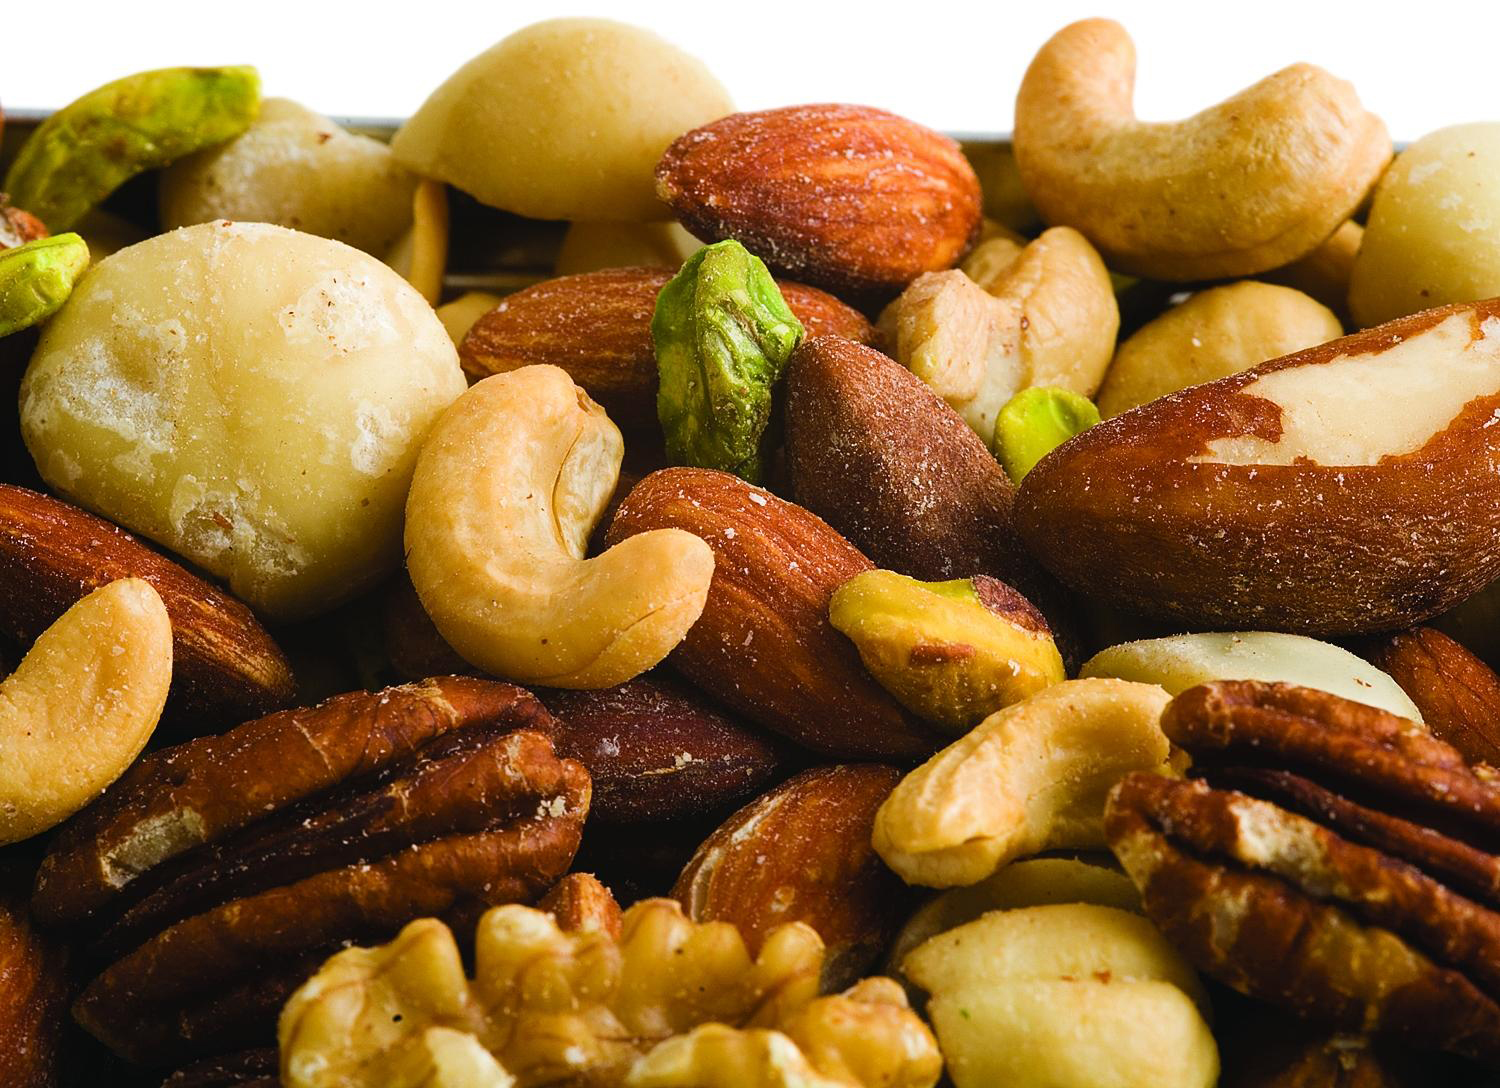 The Health Benefits Of Tree Nuts